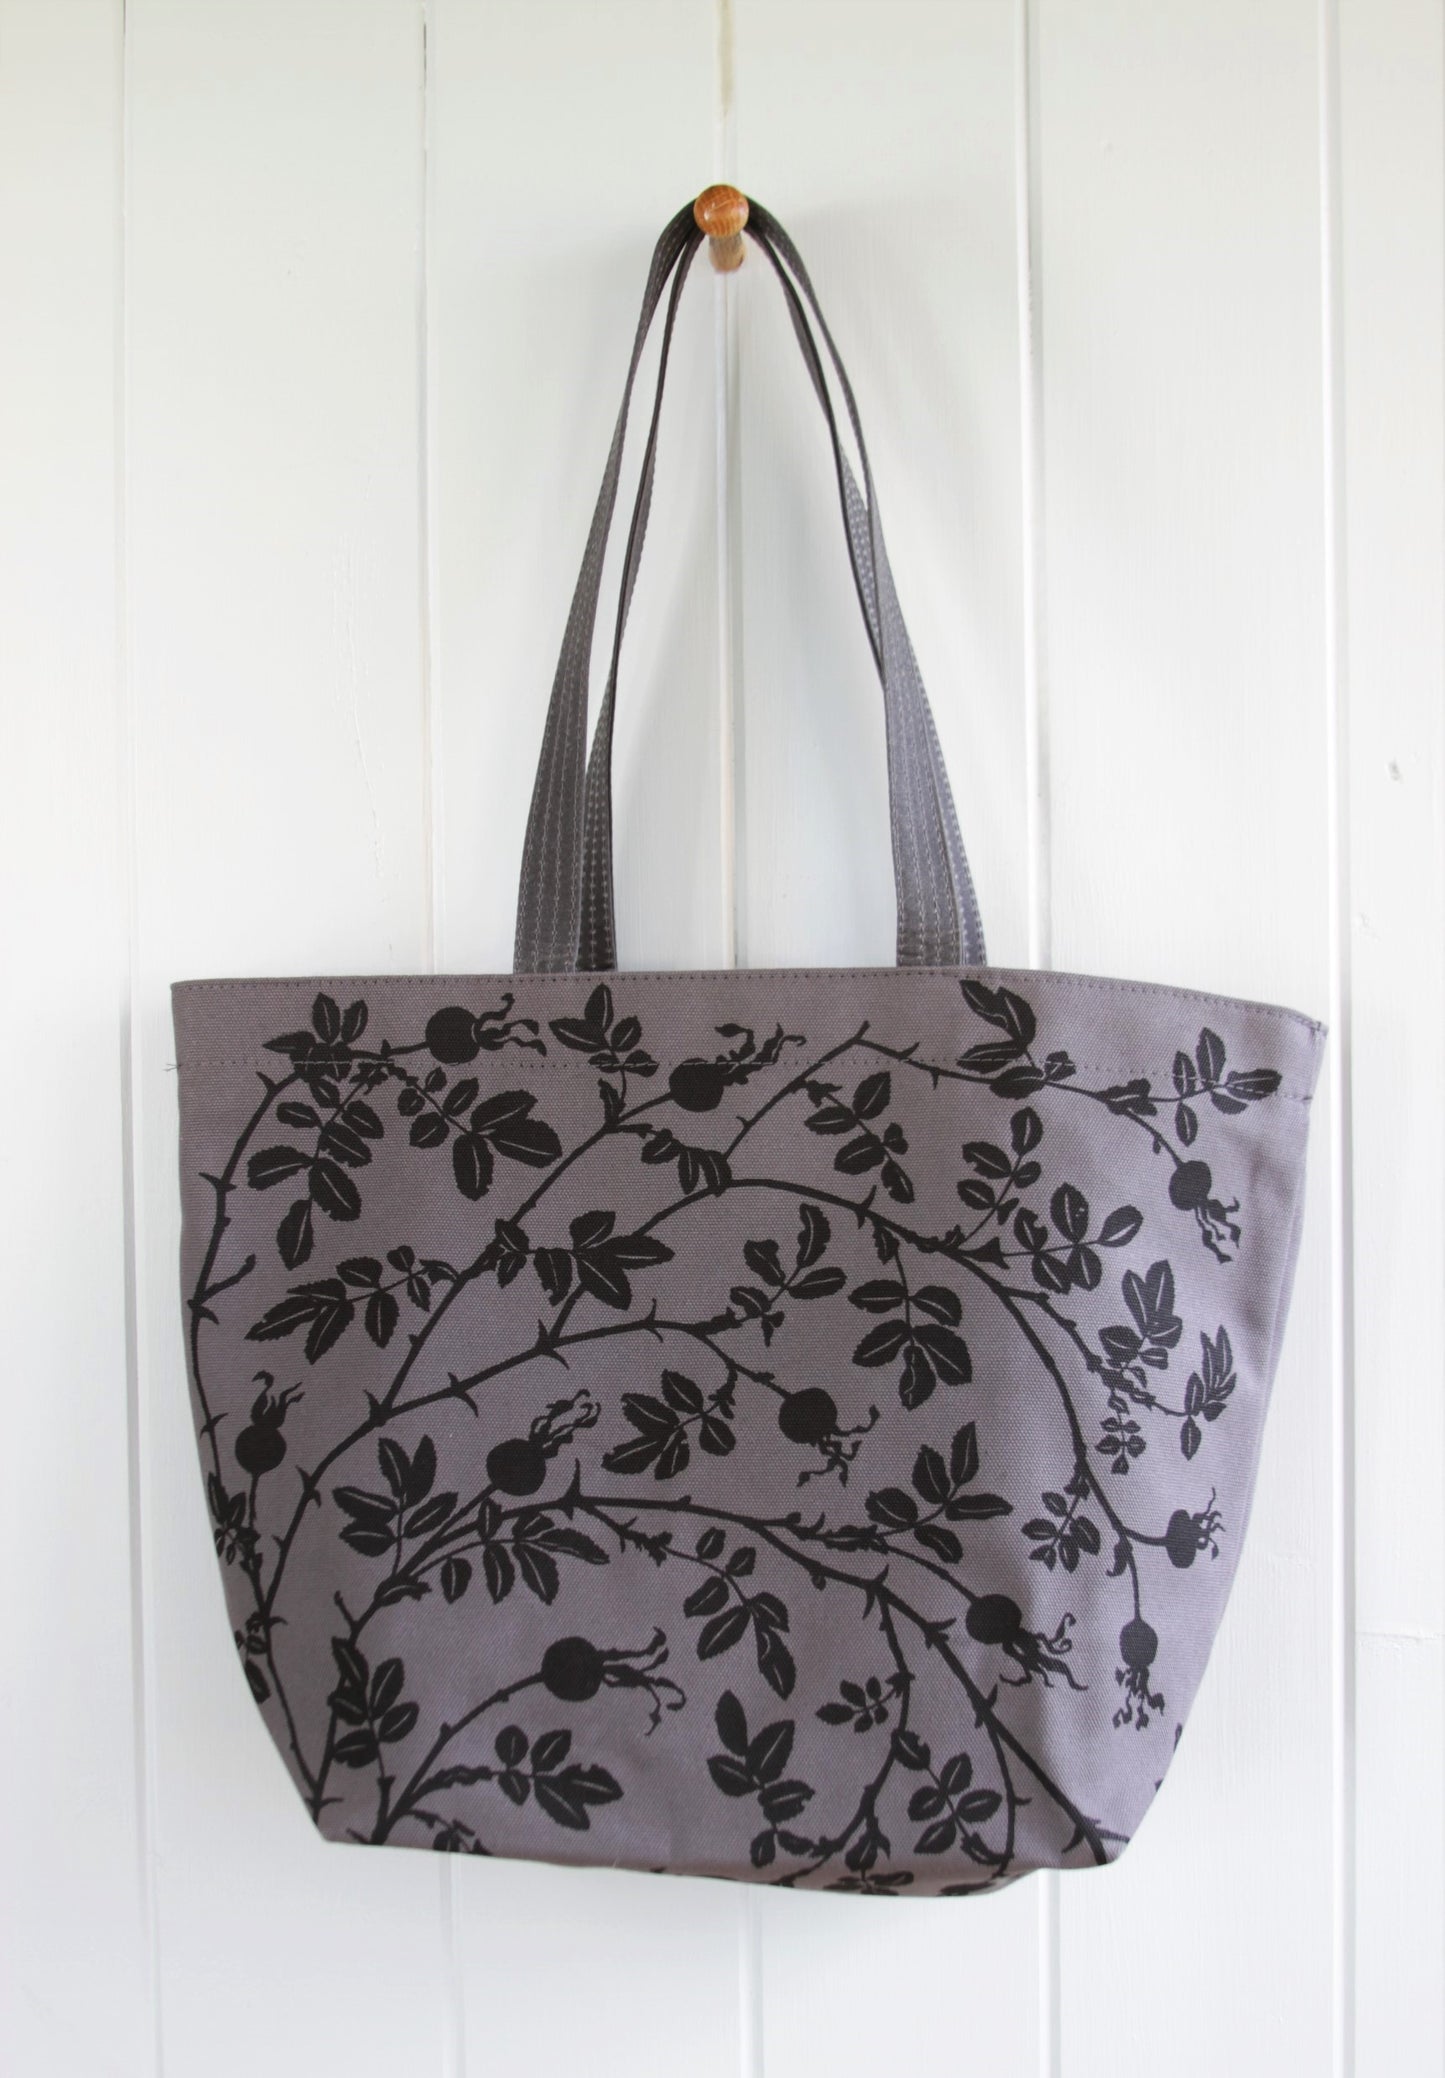 Sturdy Tote - Nootka in Charcoal on Grey